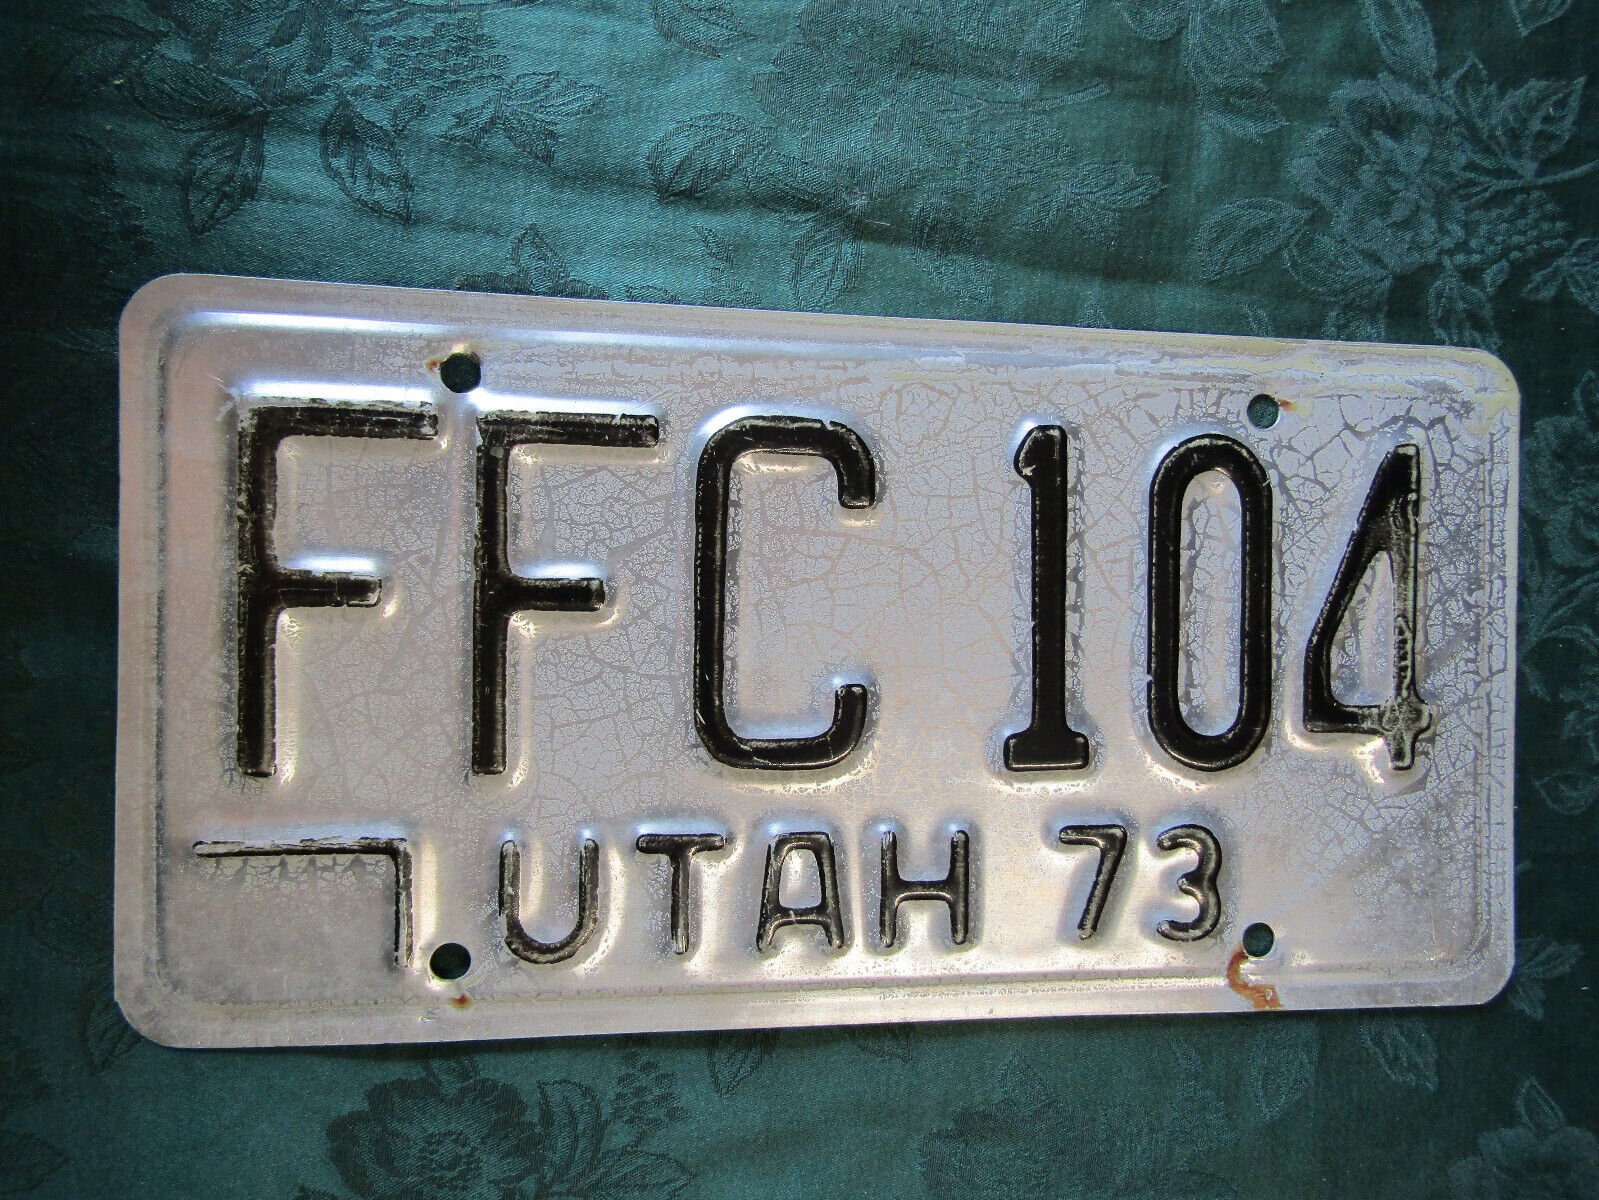 1973 Utah License Plate FFC 104, Baked by Sun